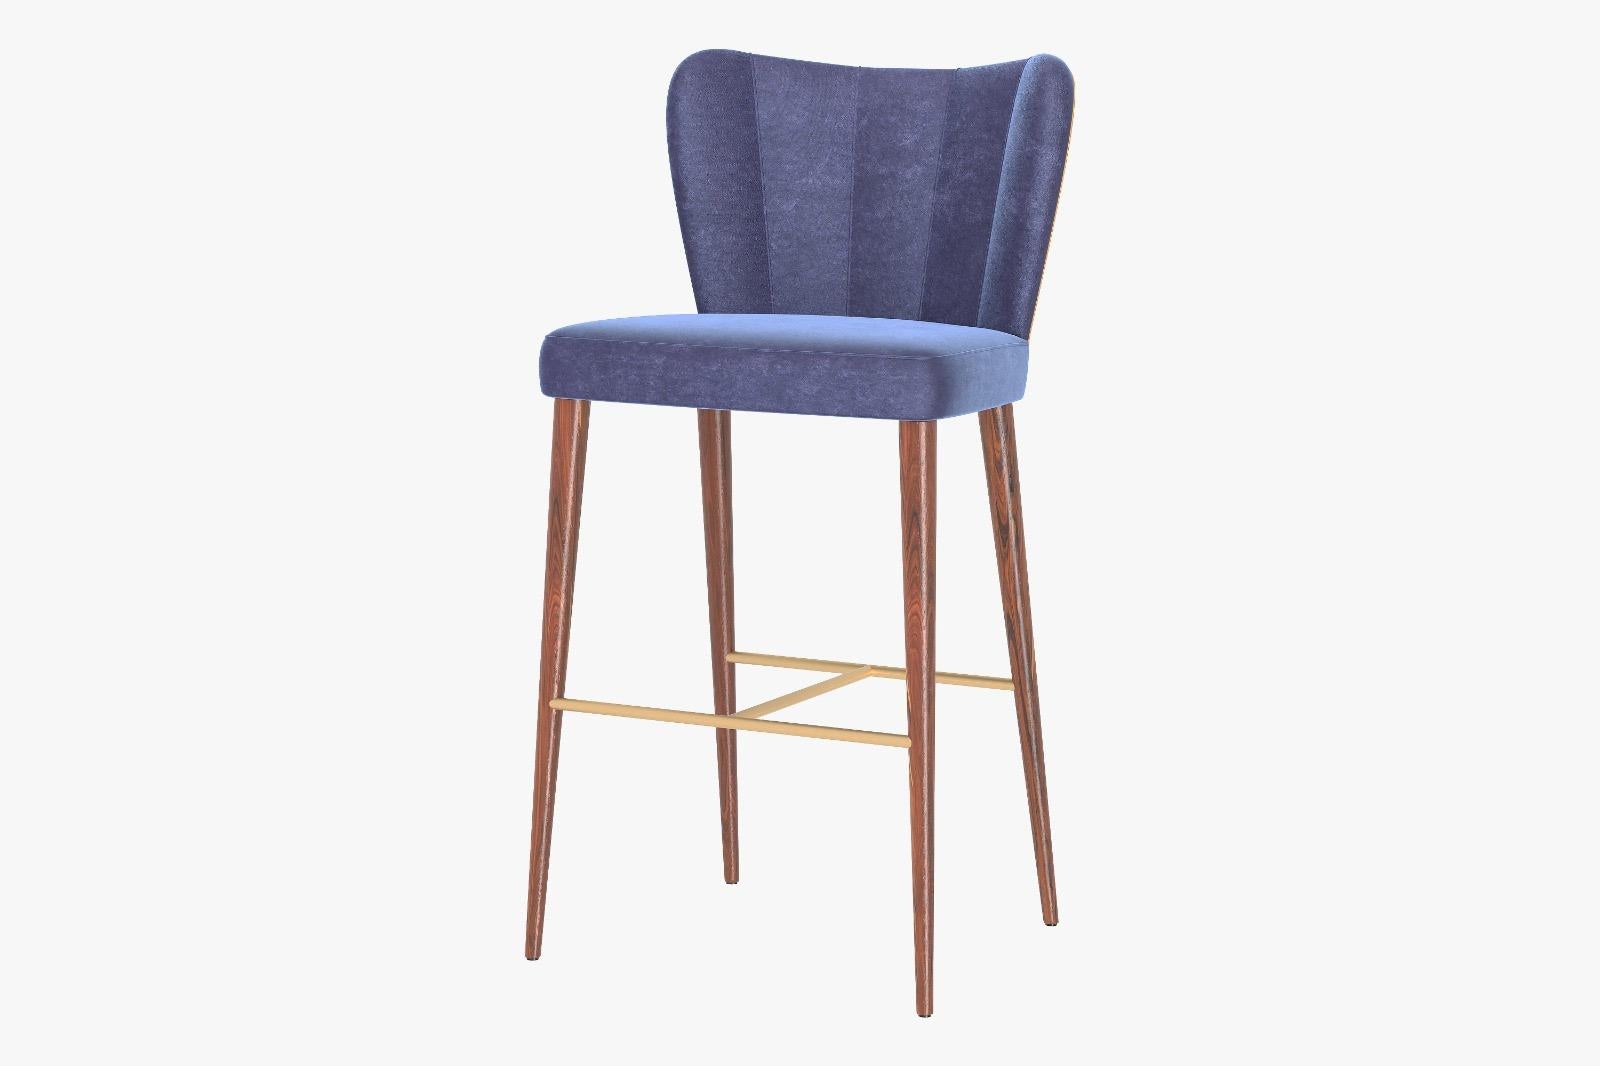 Portuguese Agata bar stool with metallic details For Sale